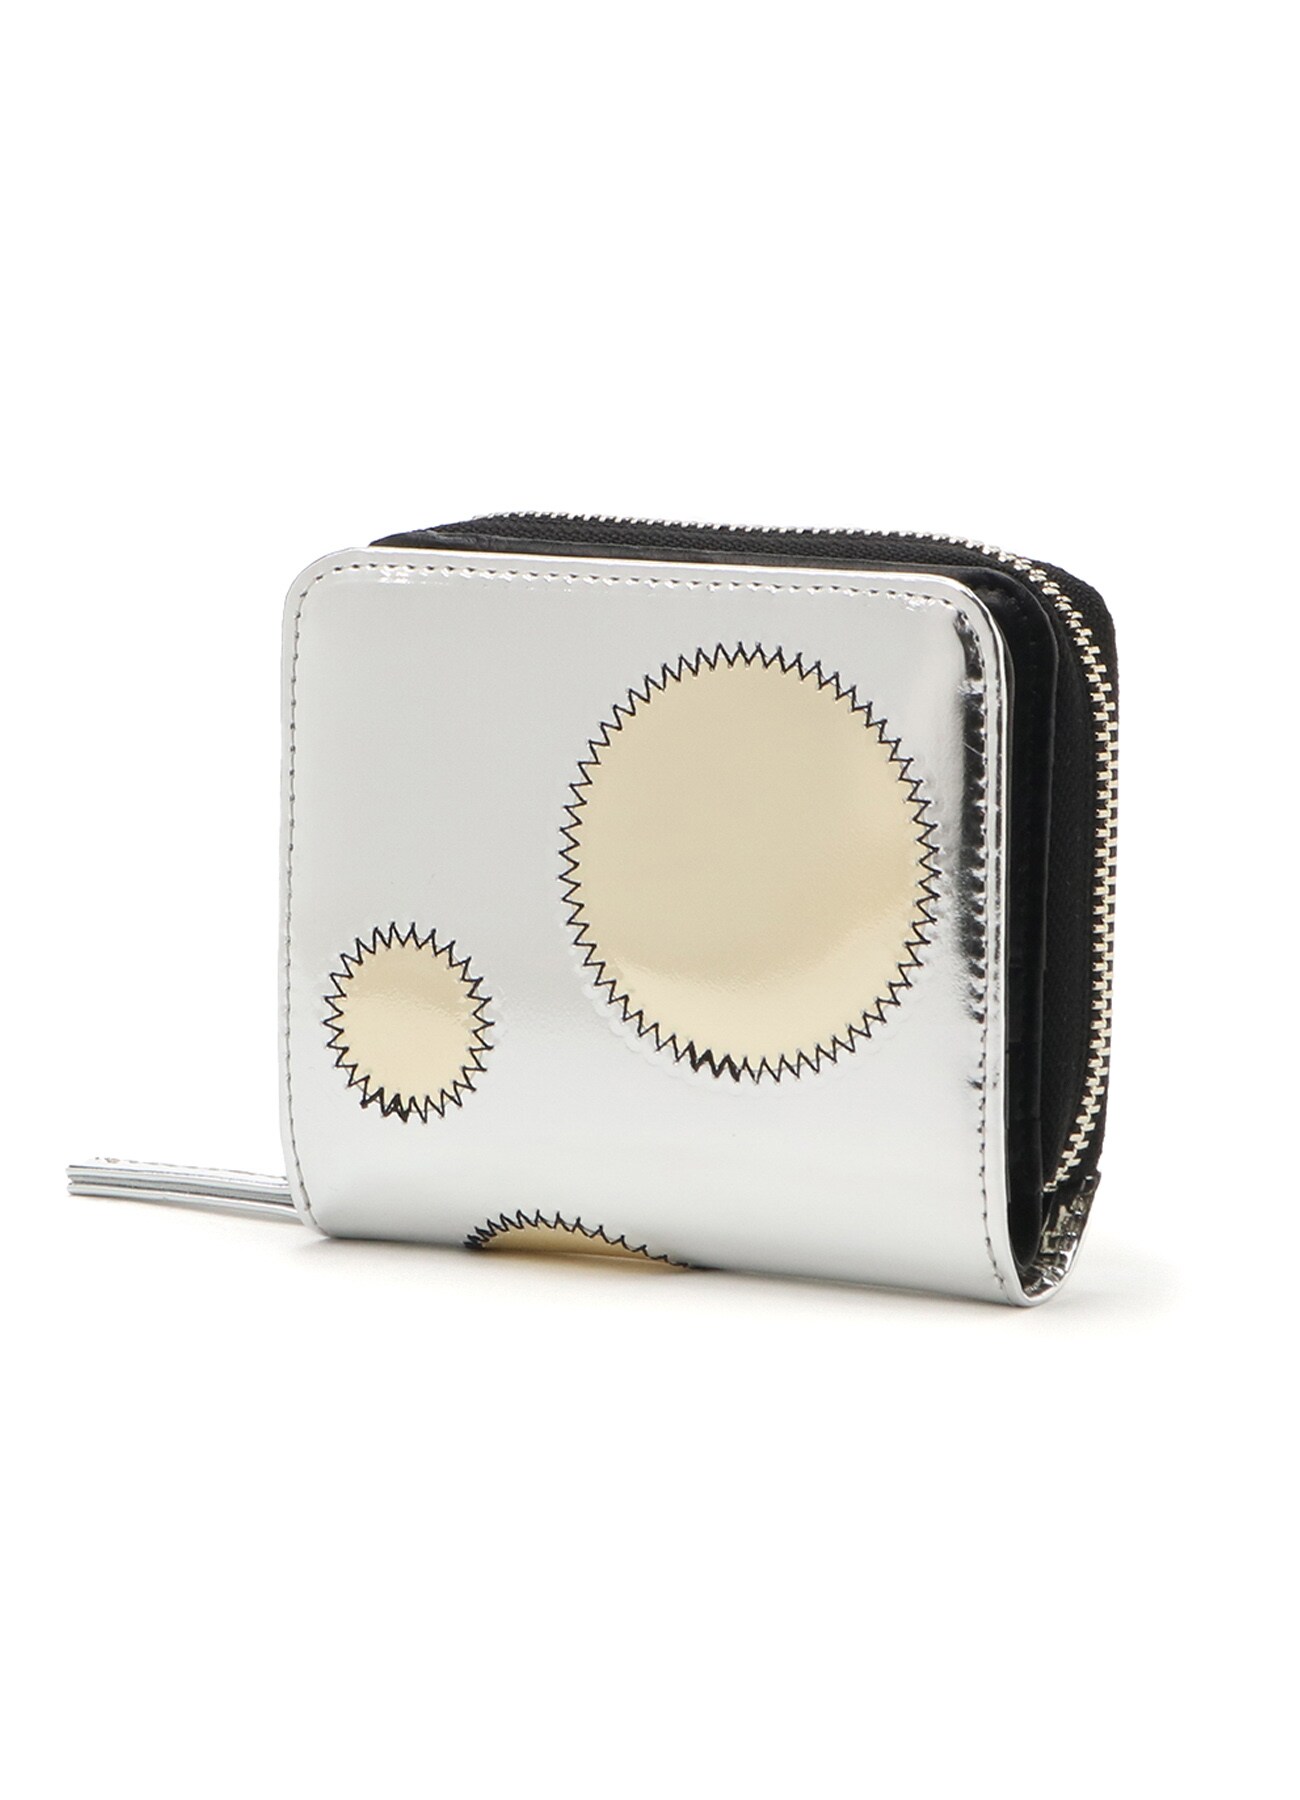 DOT PATCHWORK LEATHER WALLET